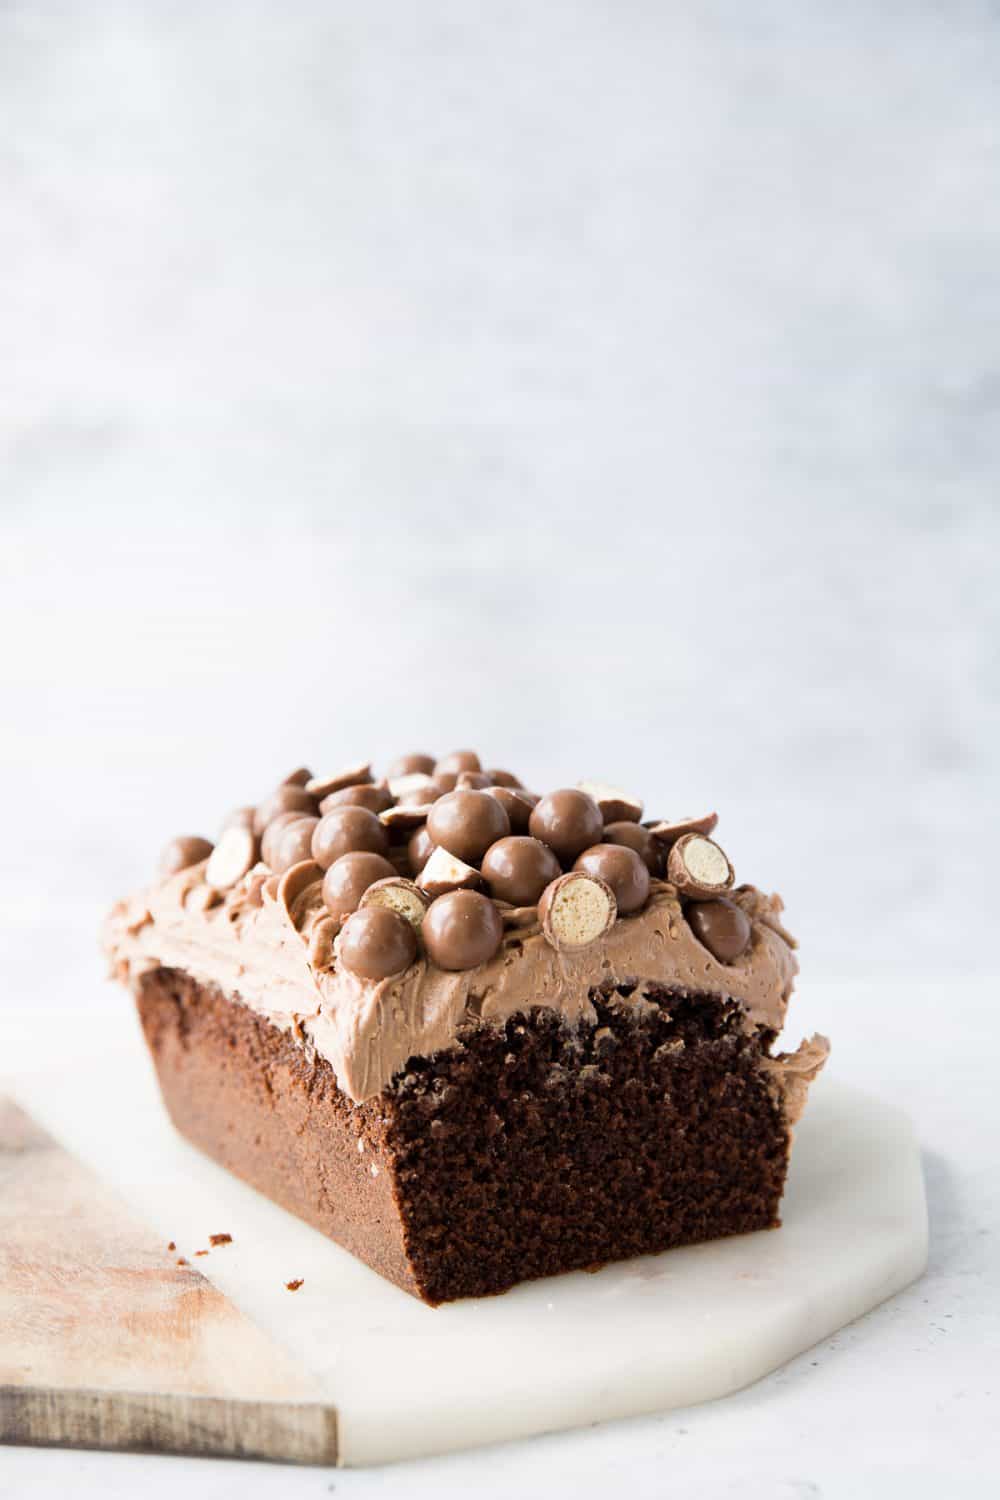 A chocolate and malt cake with buttercream topping.